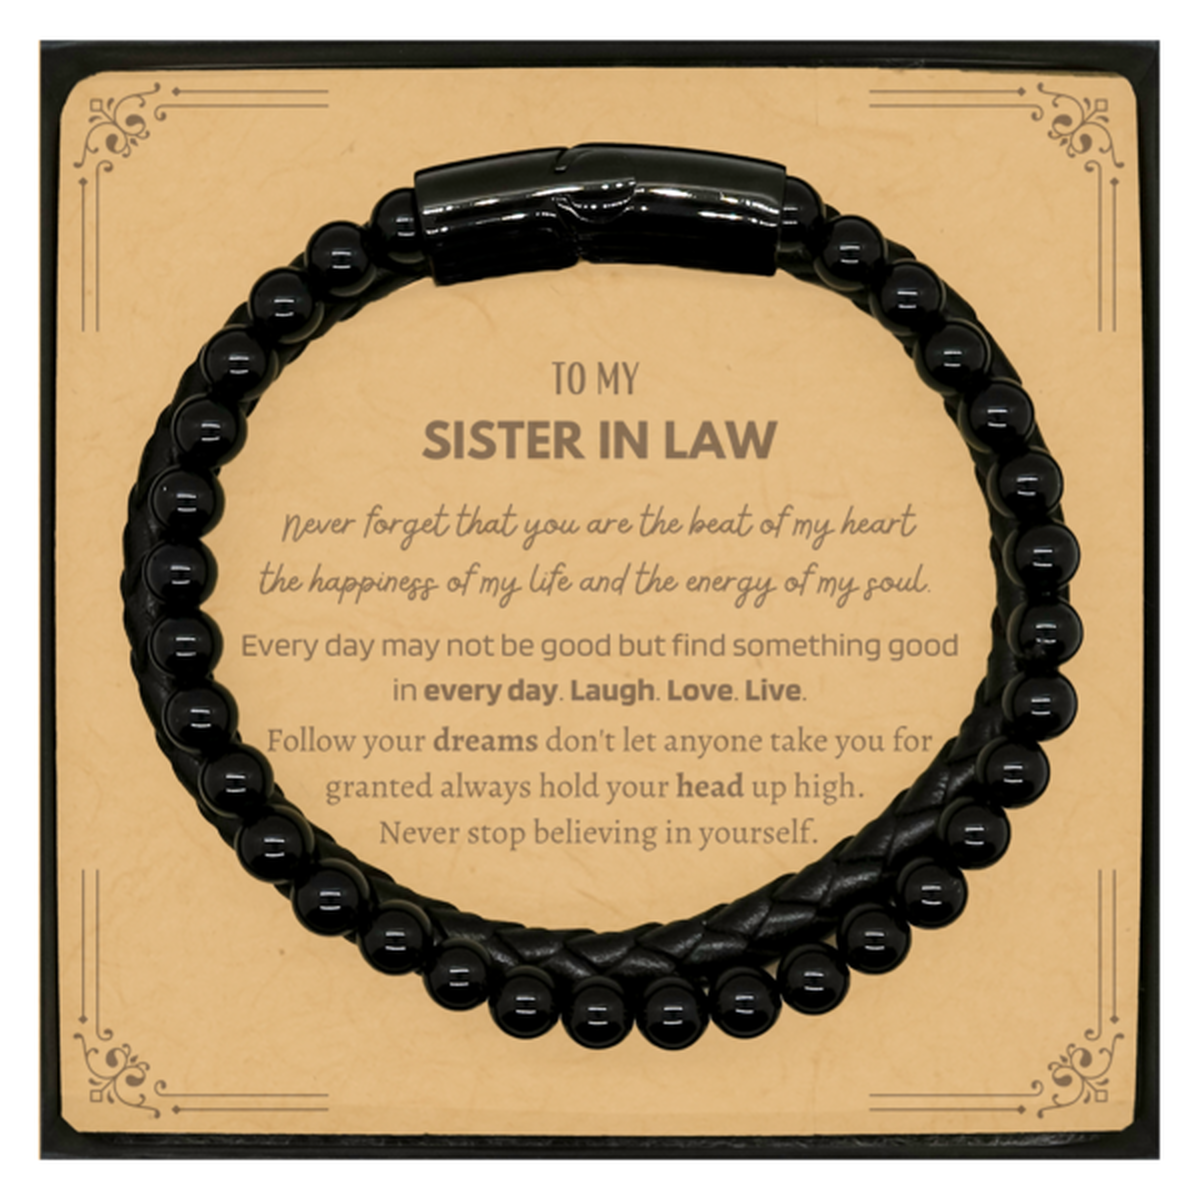 To My Sister In Law Message Card Gifts, Christmas Sister In Law Stone Leather Bracelets Present, Birthday Unique Motivational For Sister In Law, To My Sister In Law Never forget that you are the beat of my heart the happiness of my life and the energy of